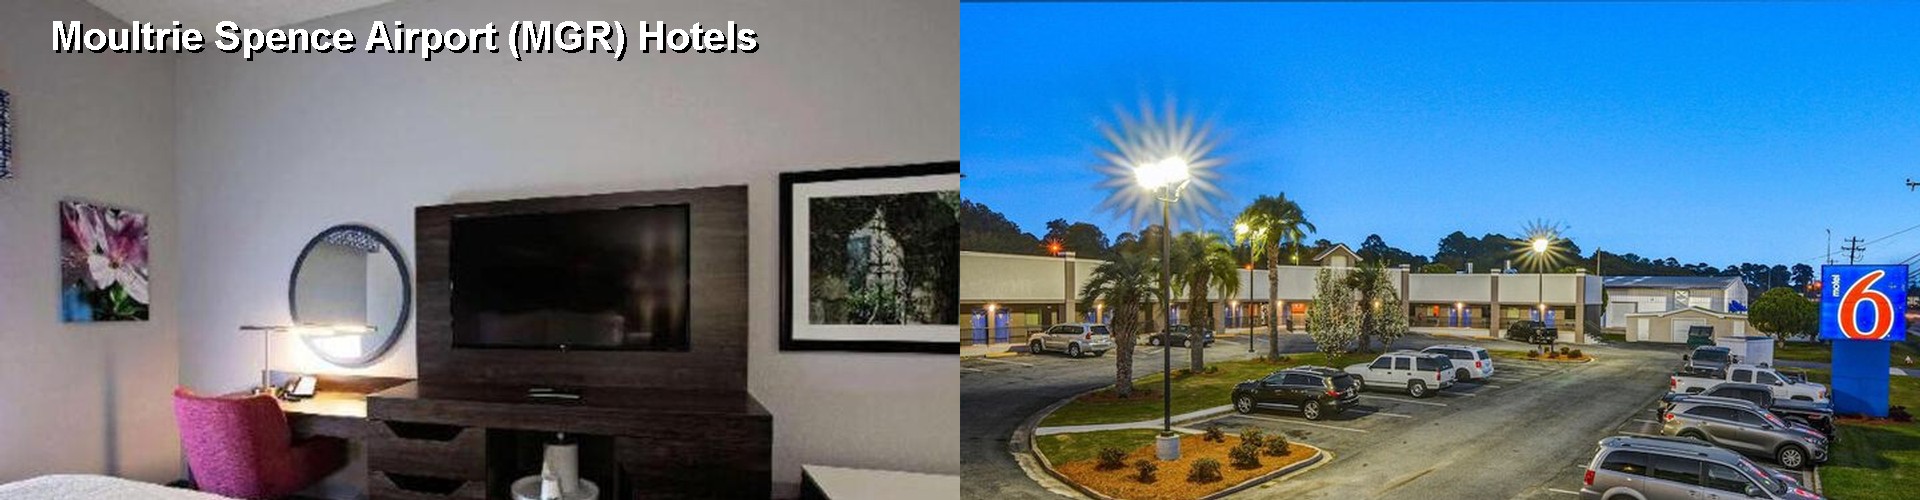 3 Best Hotels near Moultrie Spence Airport (MGR)